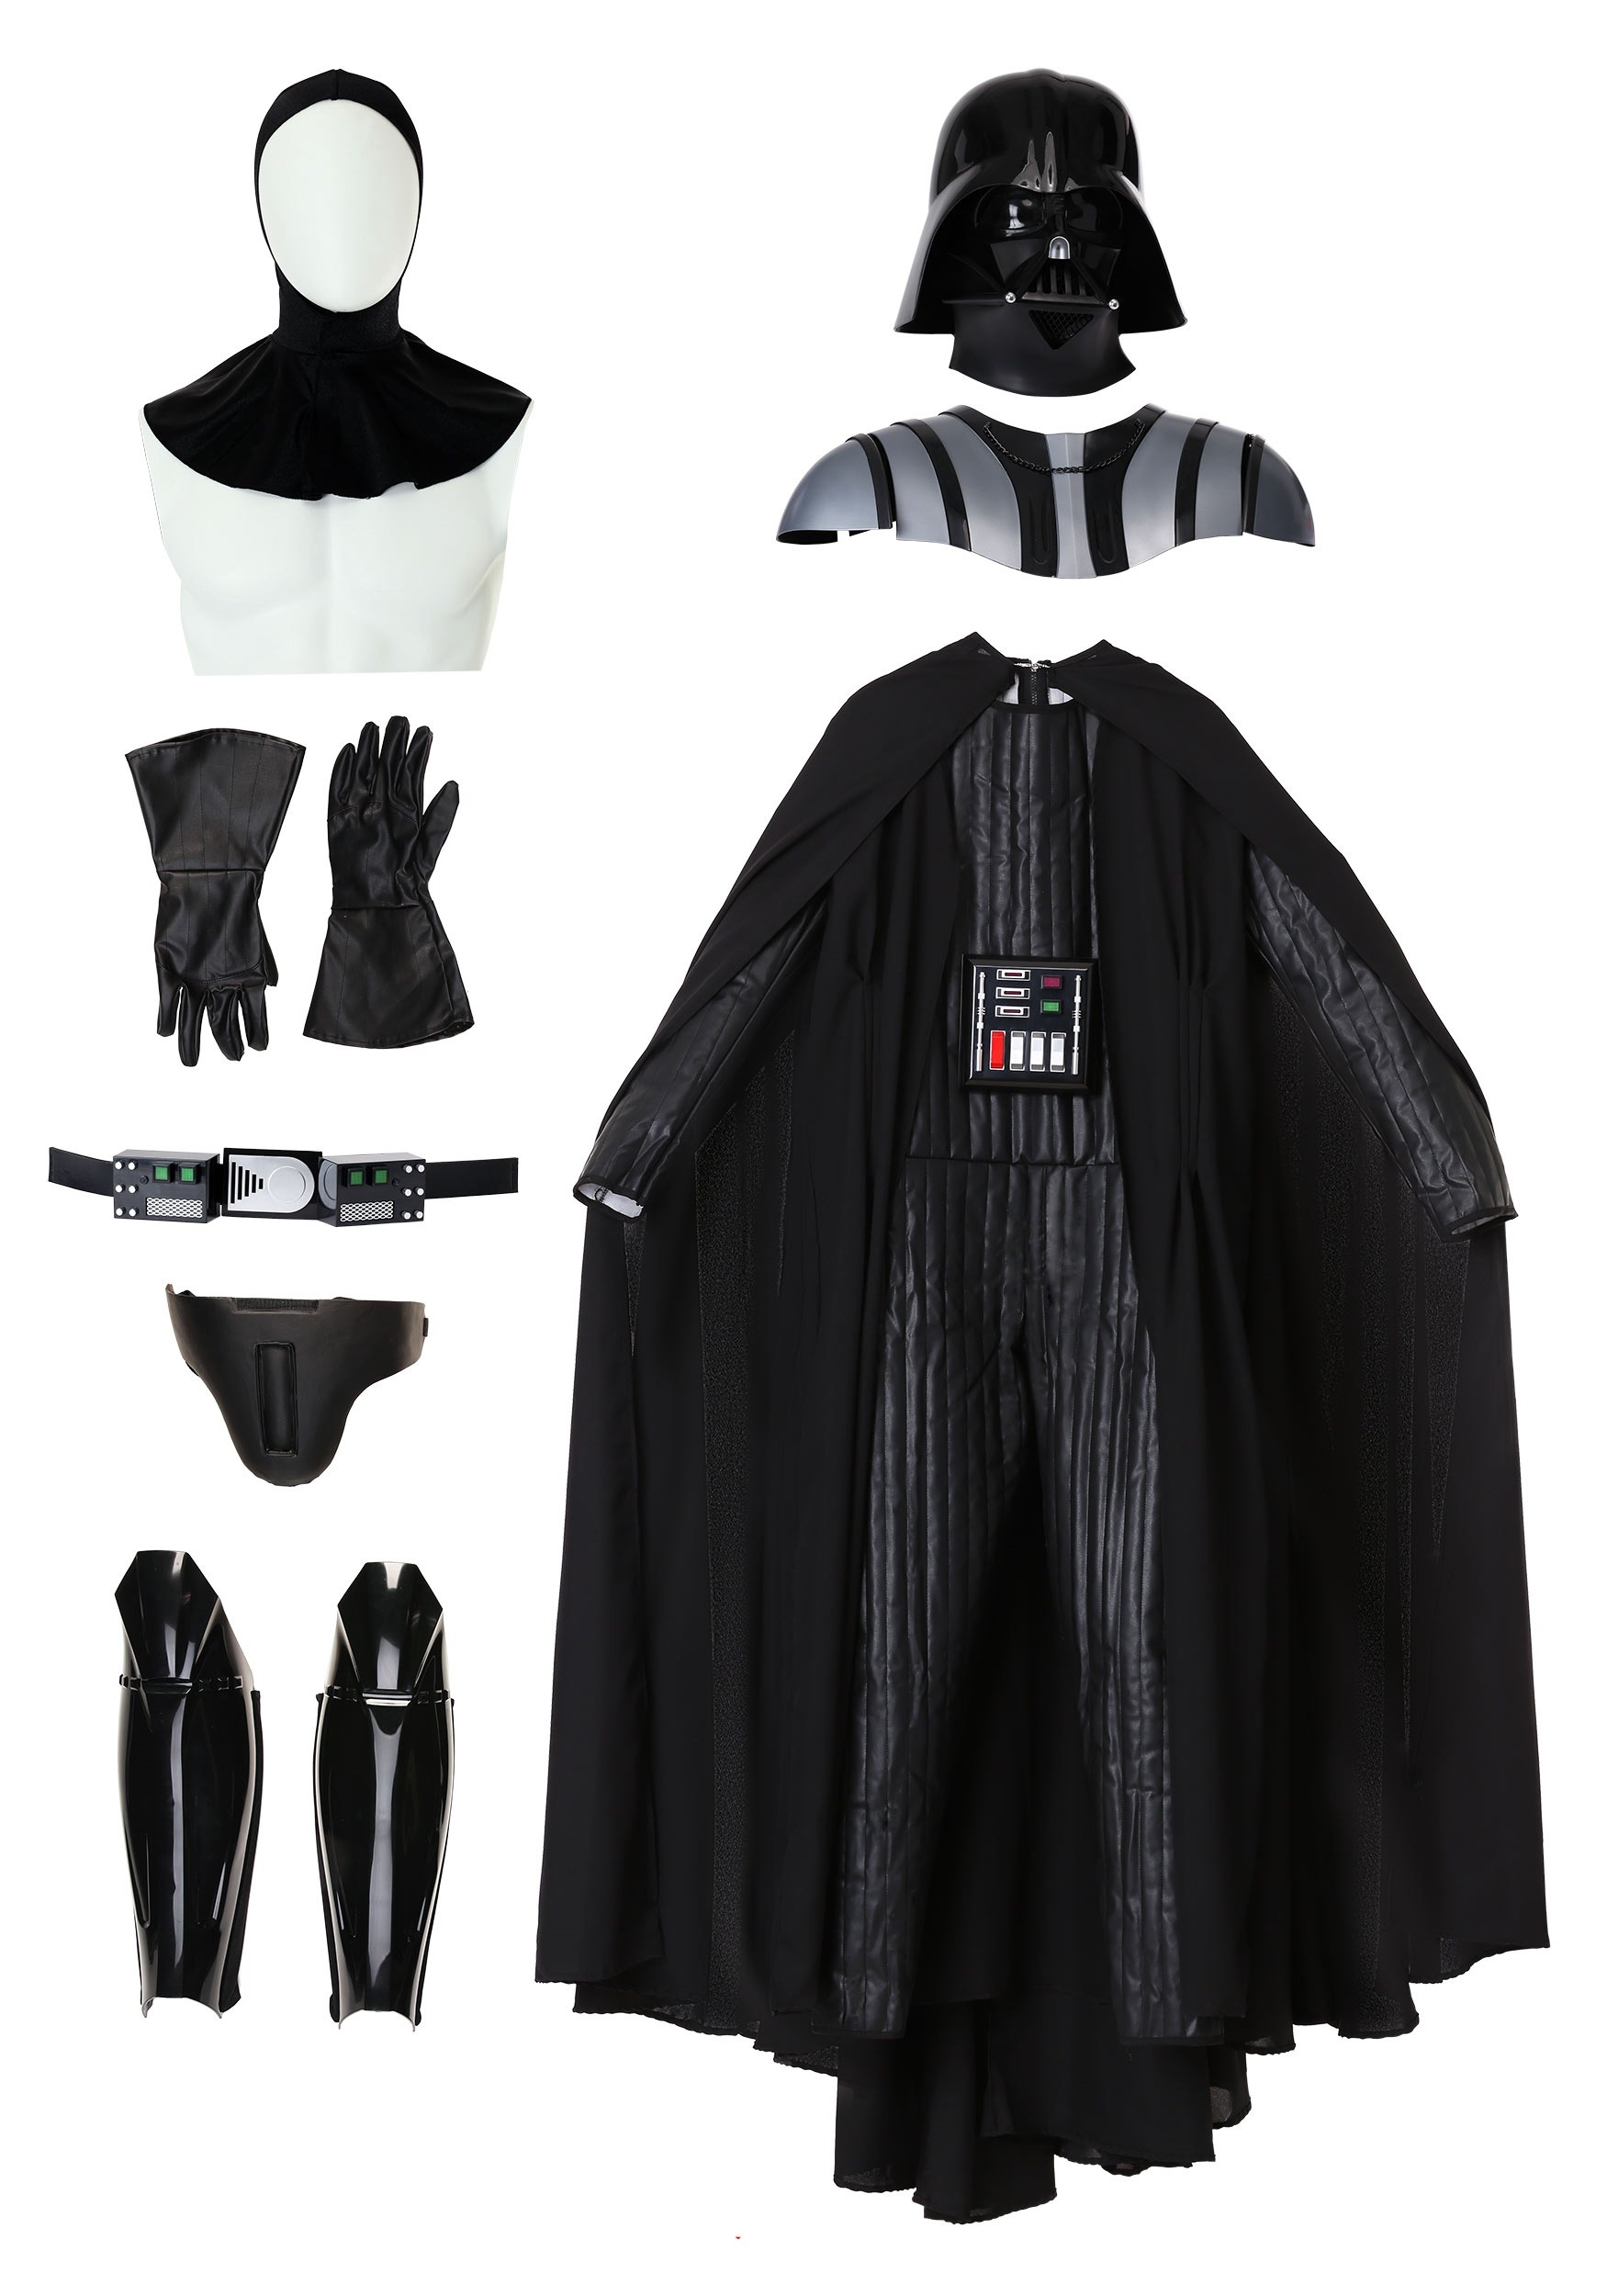 Authentic Darth Vader Costume Real Replica Offical Star Wars Costume